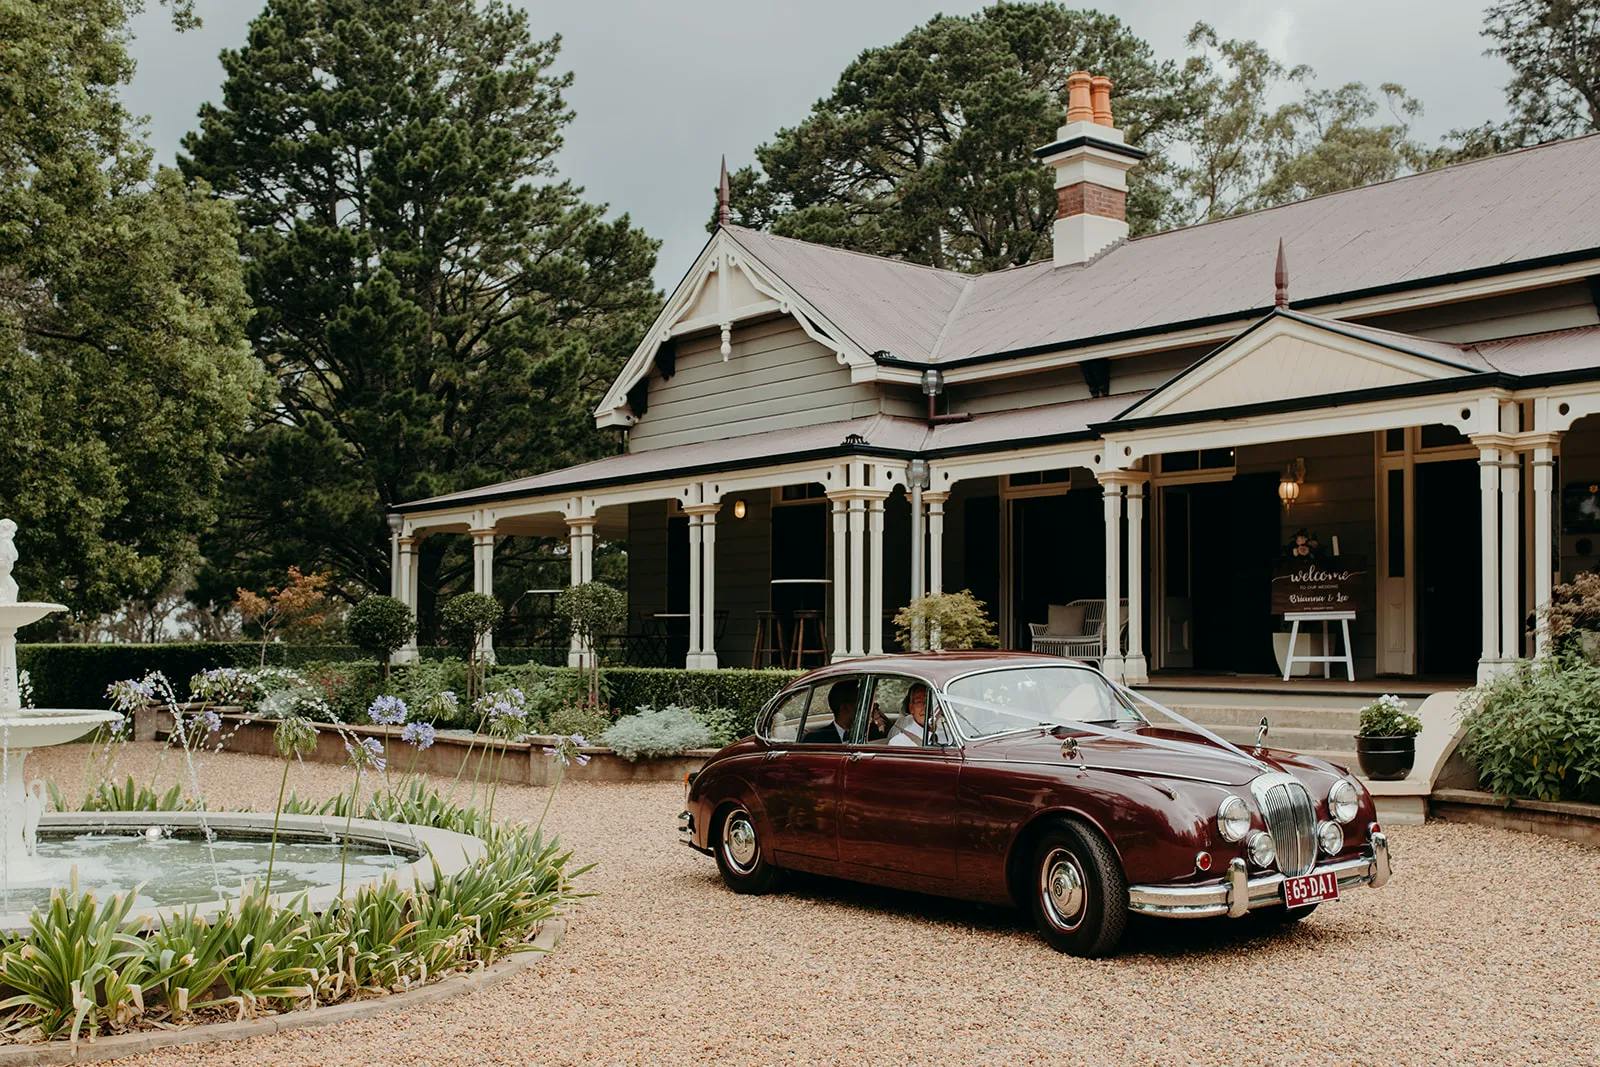 A classic, maroon vintage car is parked on a gravel driveway in front of an elegant, large house. The house features a wraparound porch, ornate trim, and a manicured garden with a fountain in the foreground. Tall trees surround the property under a cloudy sky.